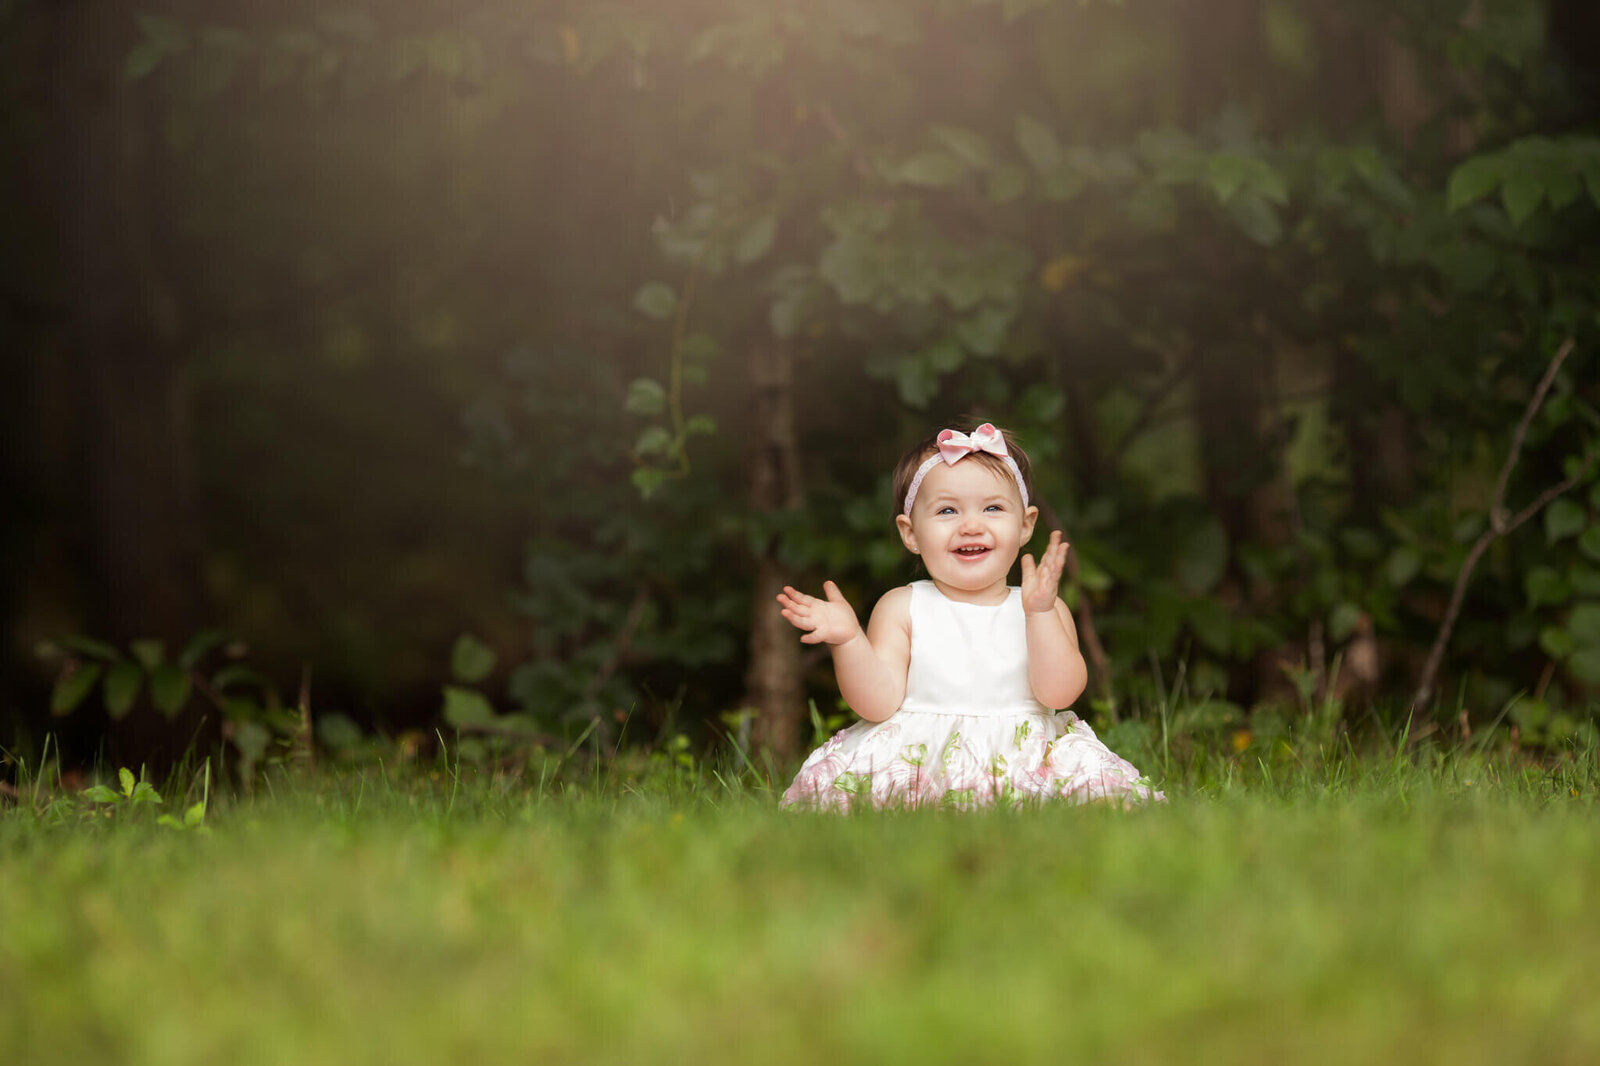 One year old girl sitting in grasss smiling with hands up ready to clap